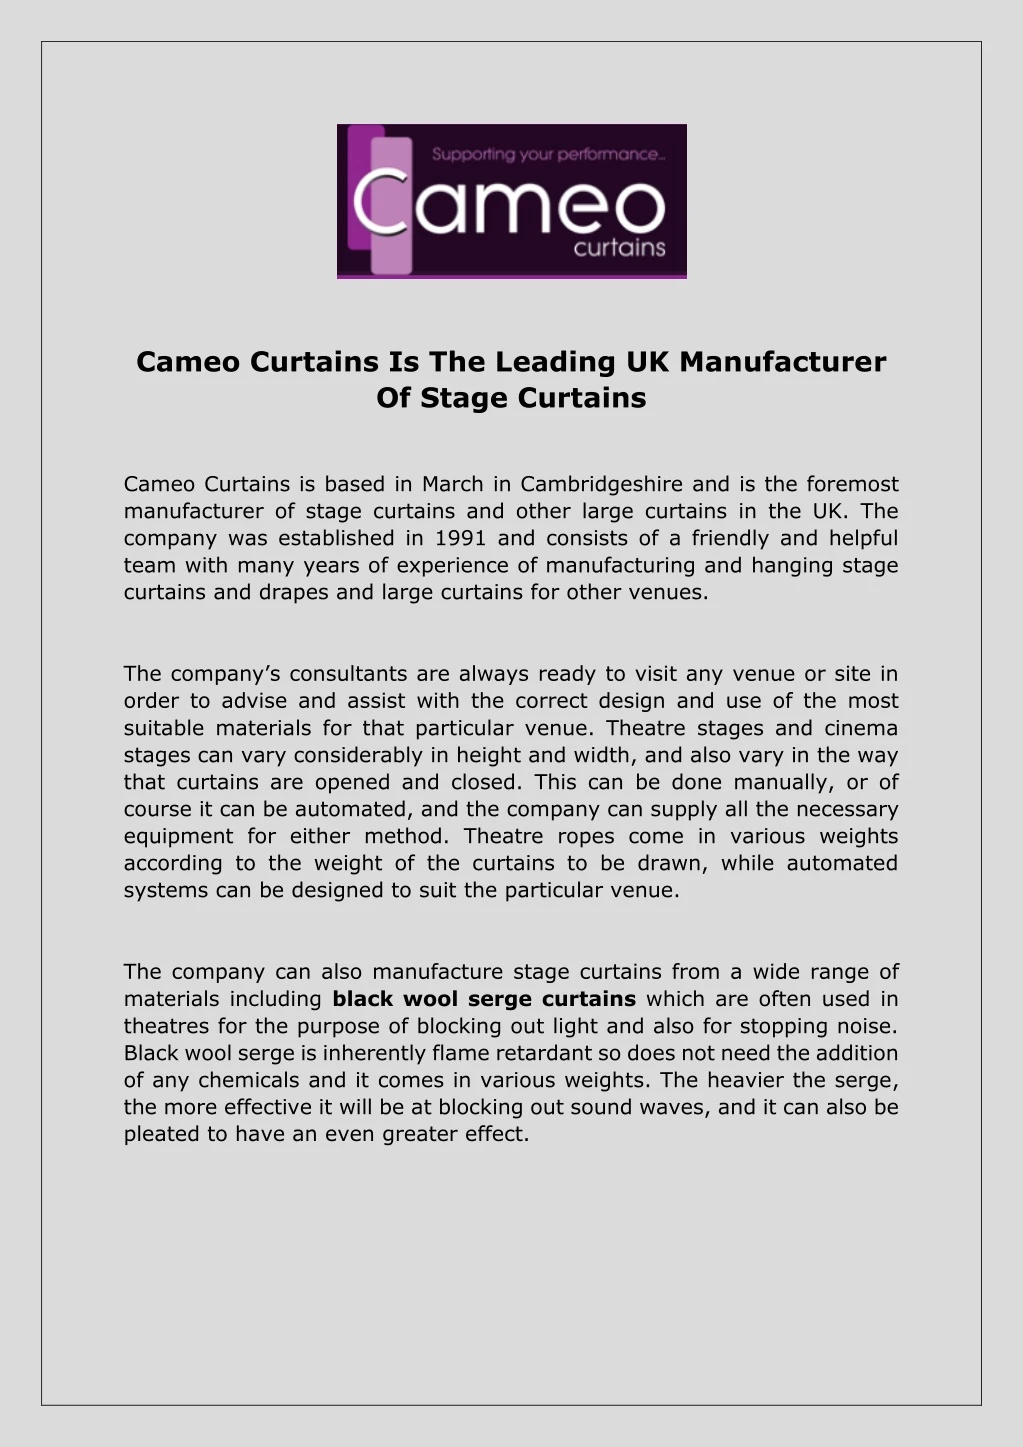 cameo curtains is the leading uk manufacturer